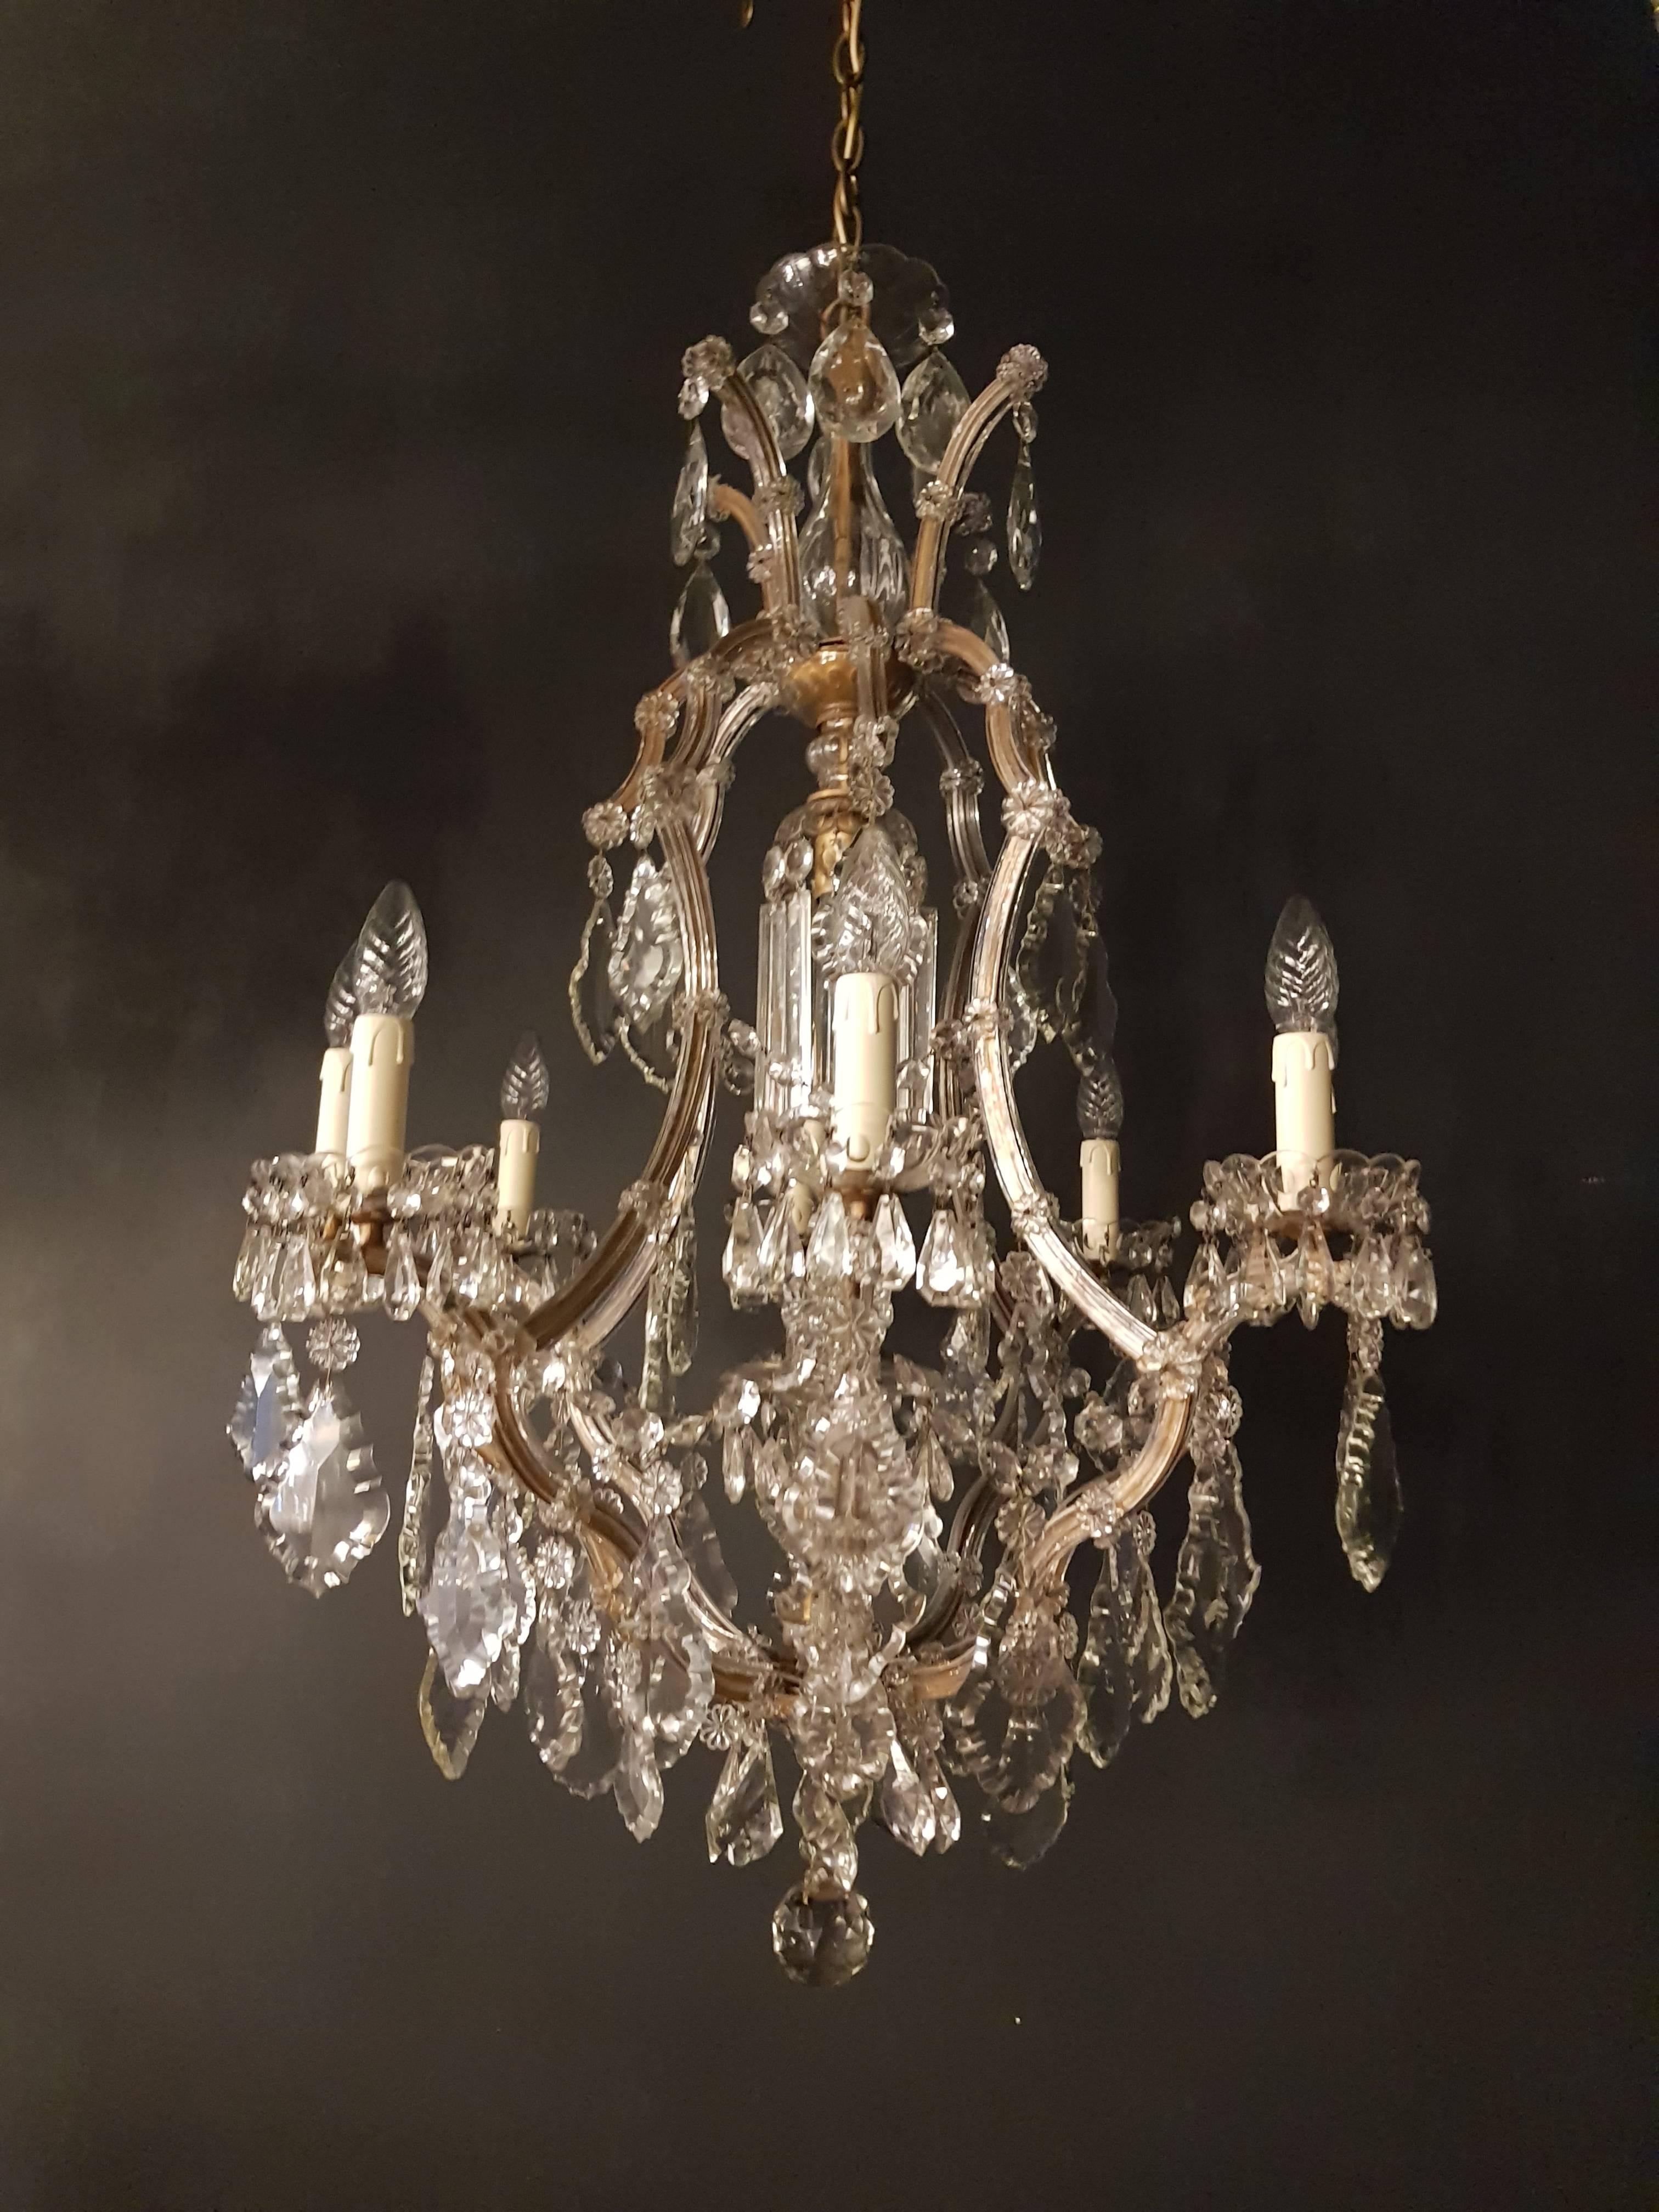 Brass Maria Theresa Crystal Chandelier Antique Ceiling Lamp Lustre